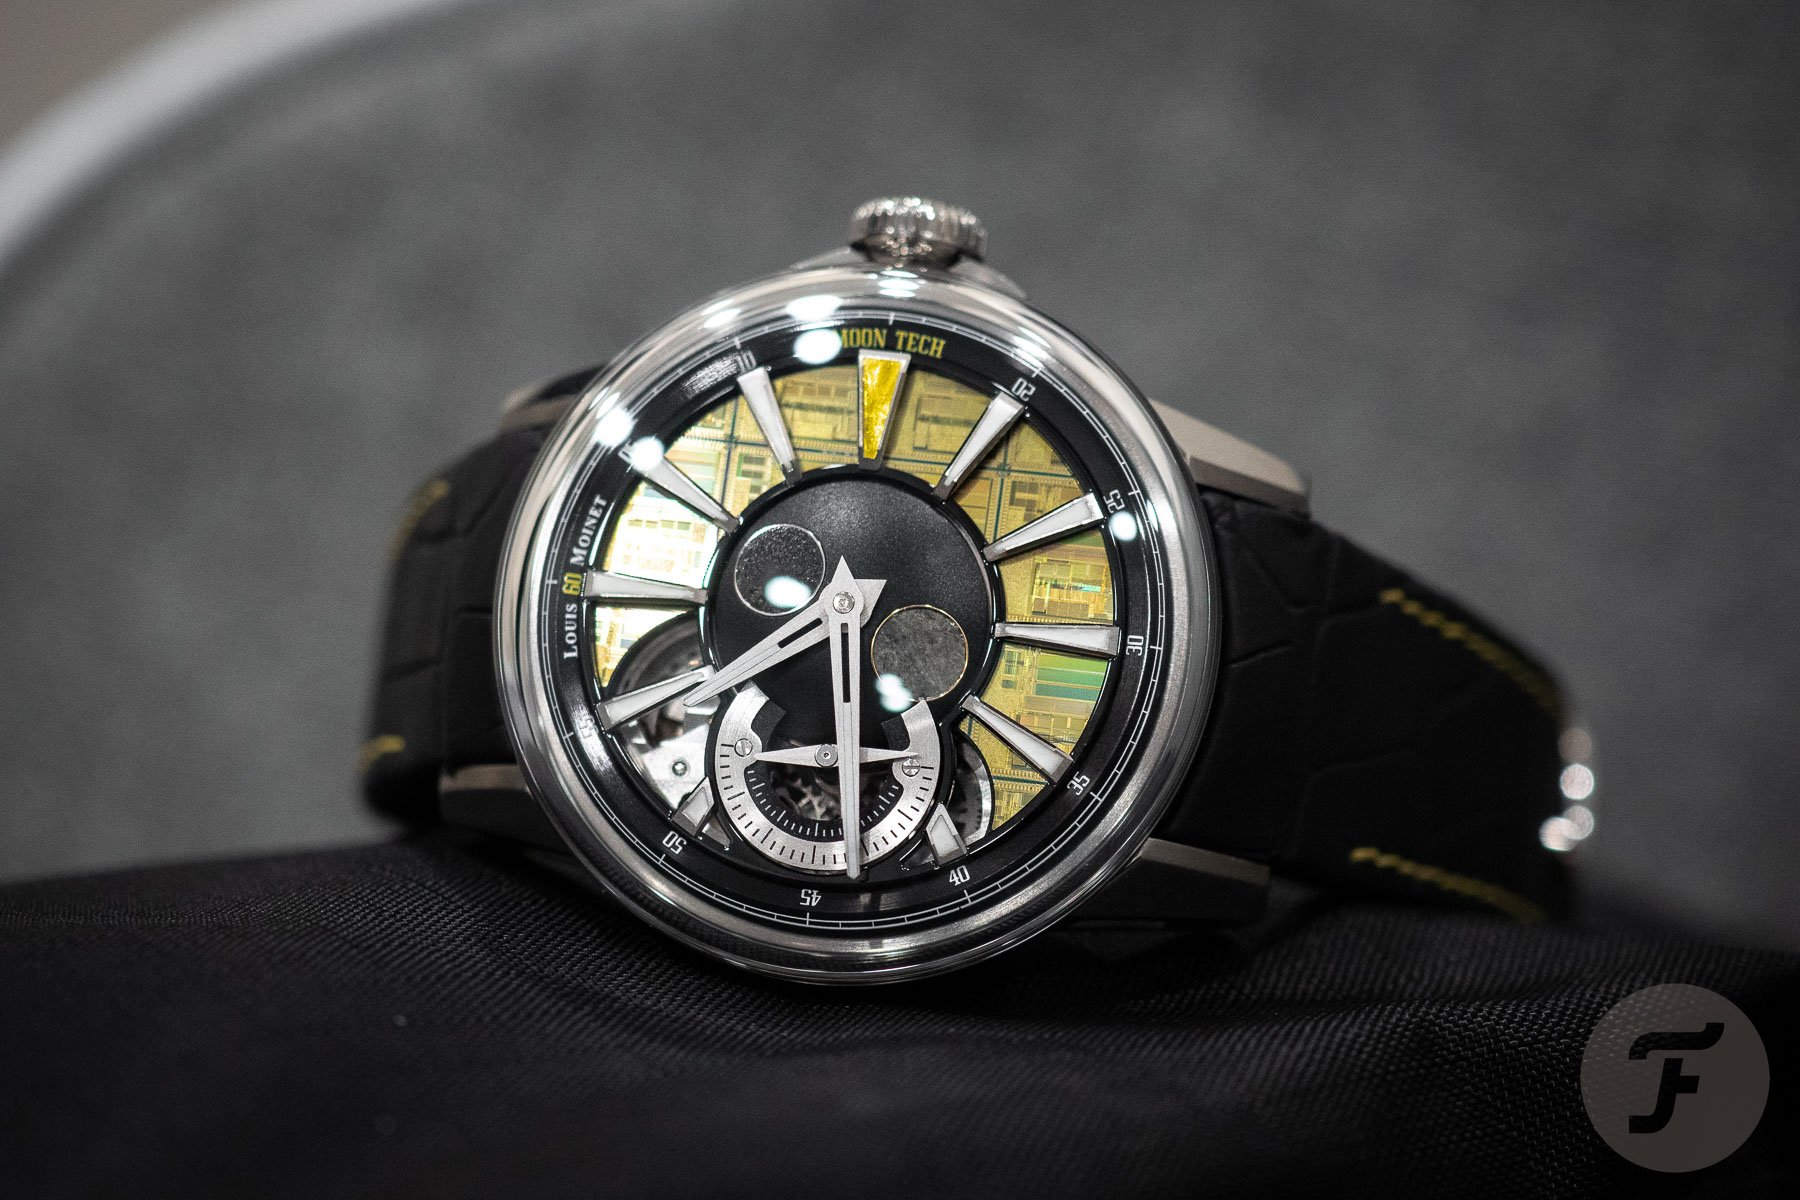 Introducing the Yema x Worn & Wound Superman Maxi Dial Limited Edition